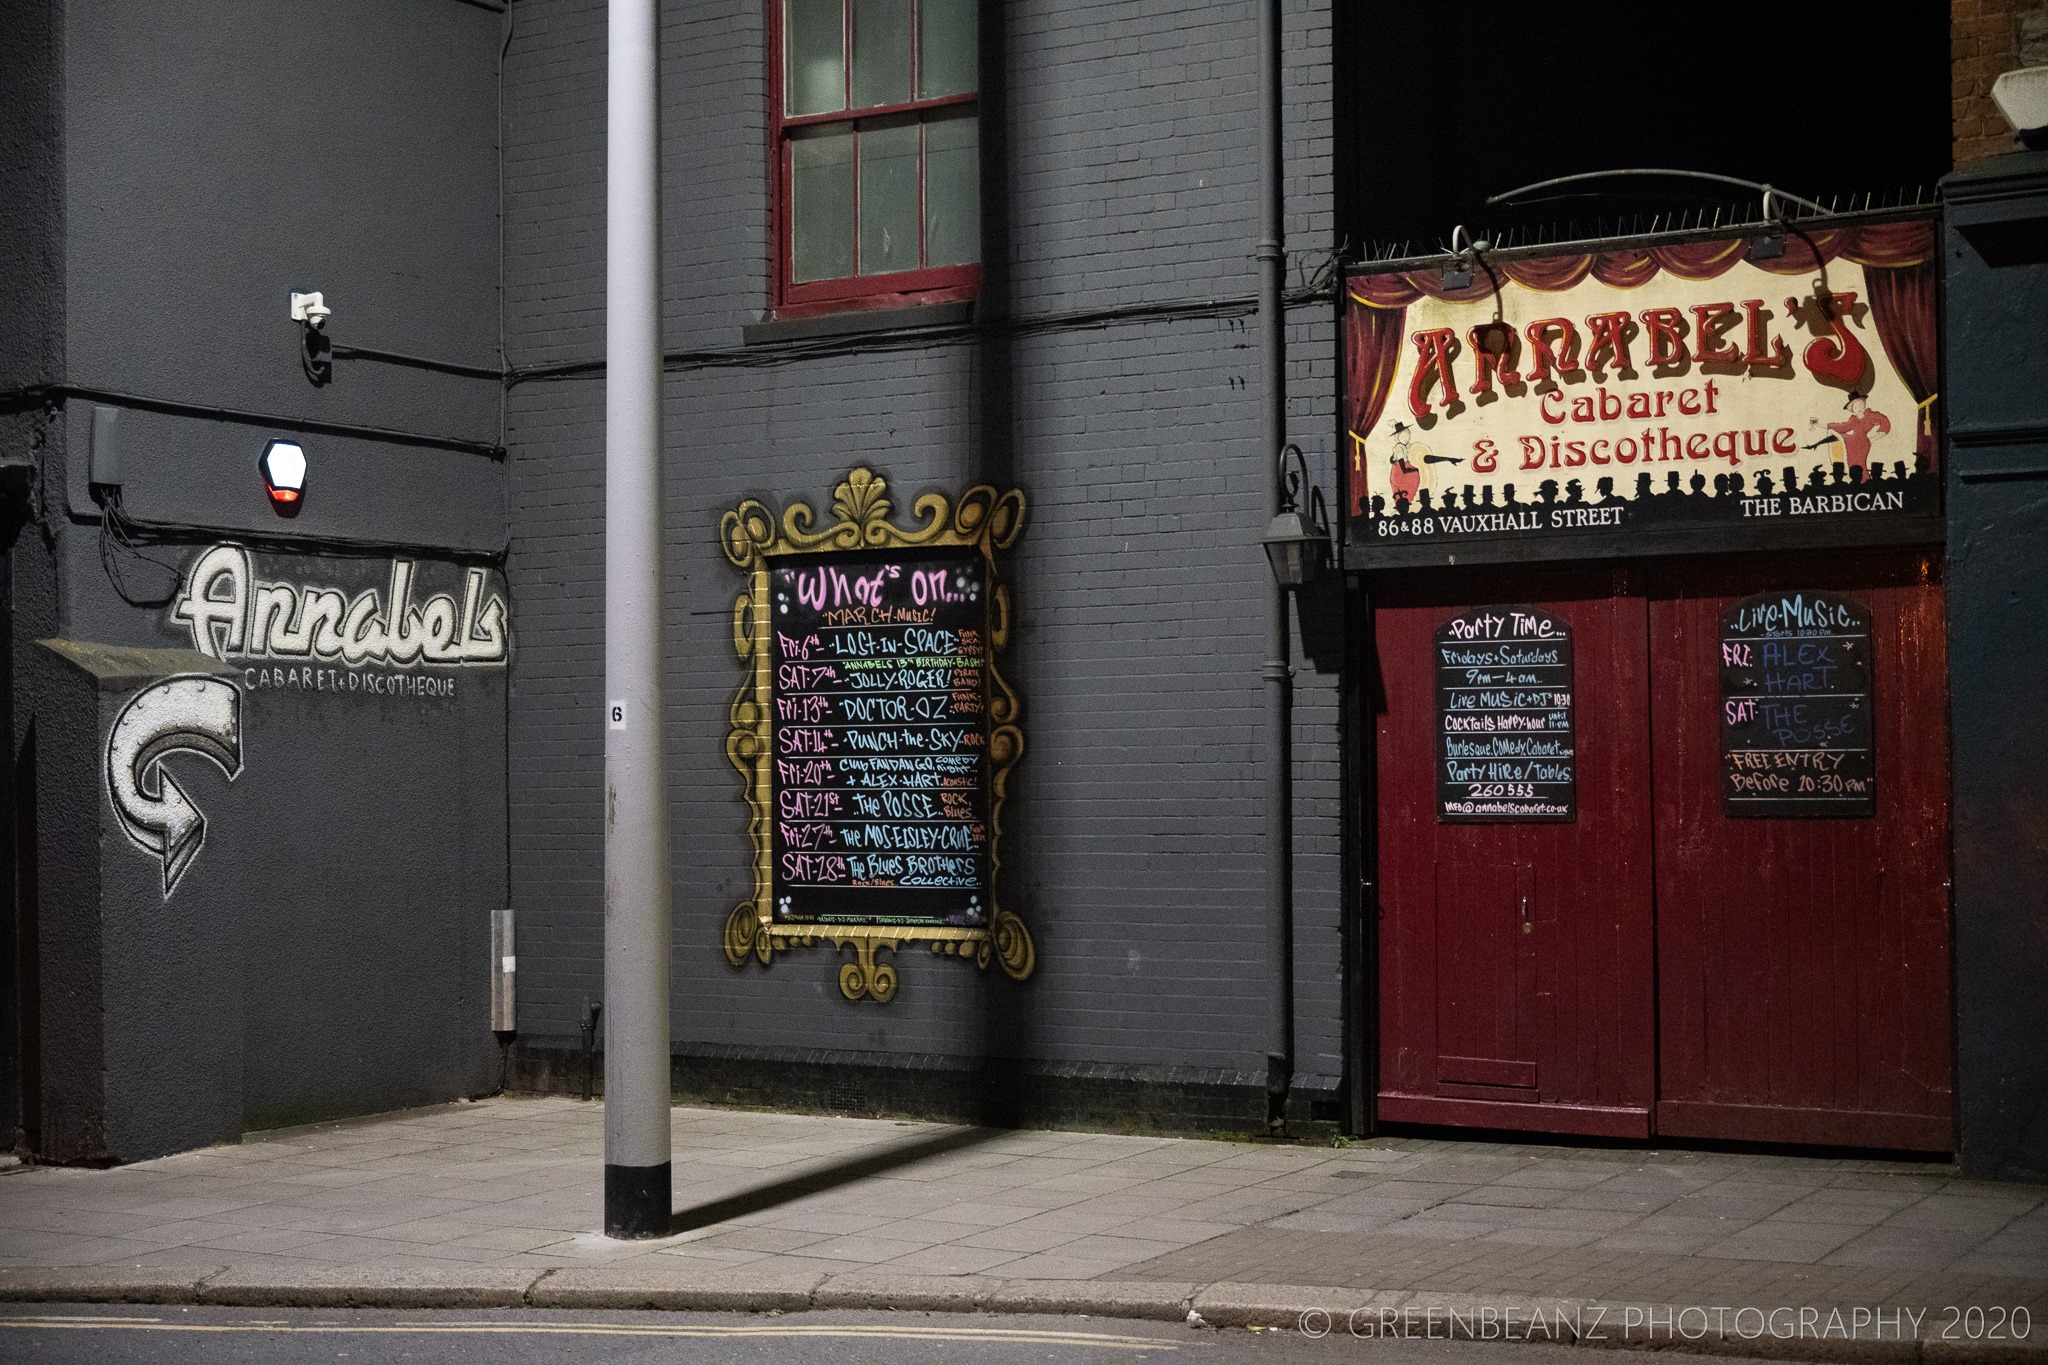 'Let the Music Play' 1st night of Venue lockdown outside Annabels in Plymouth